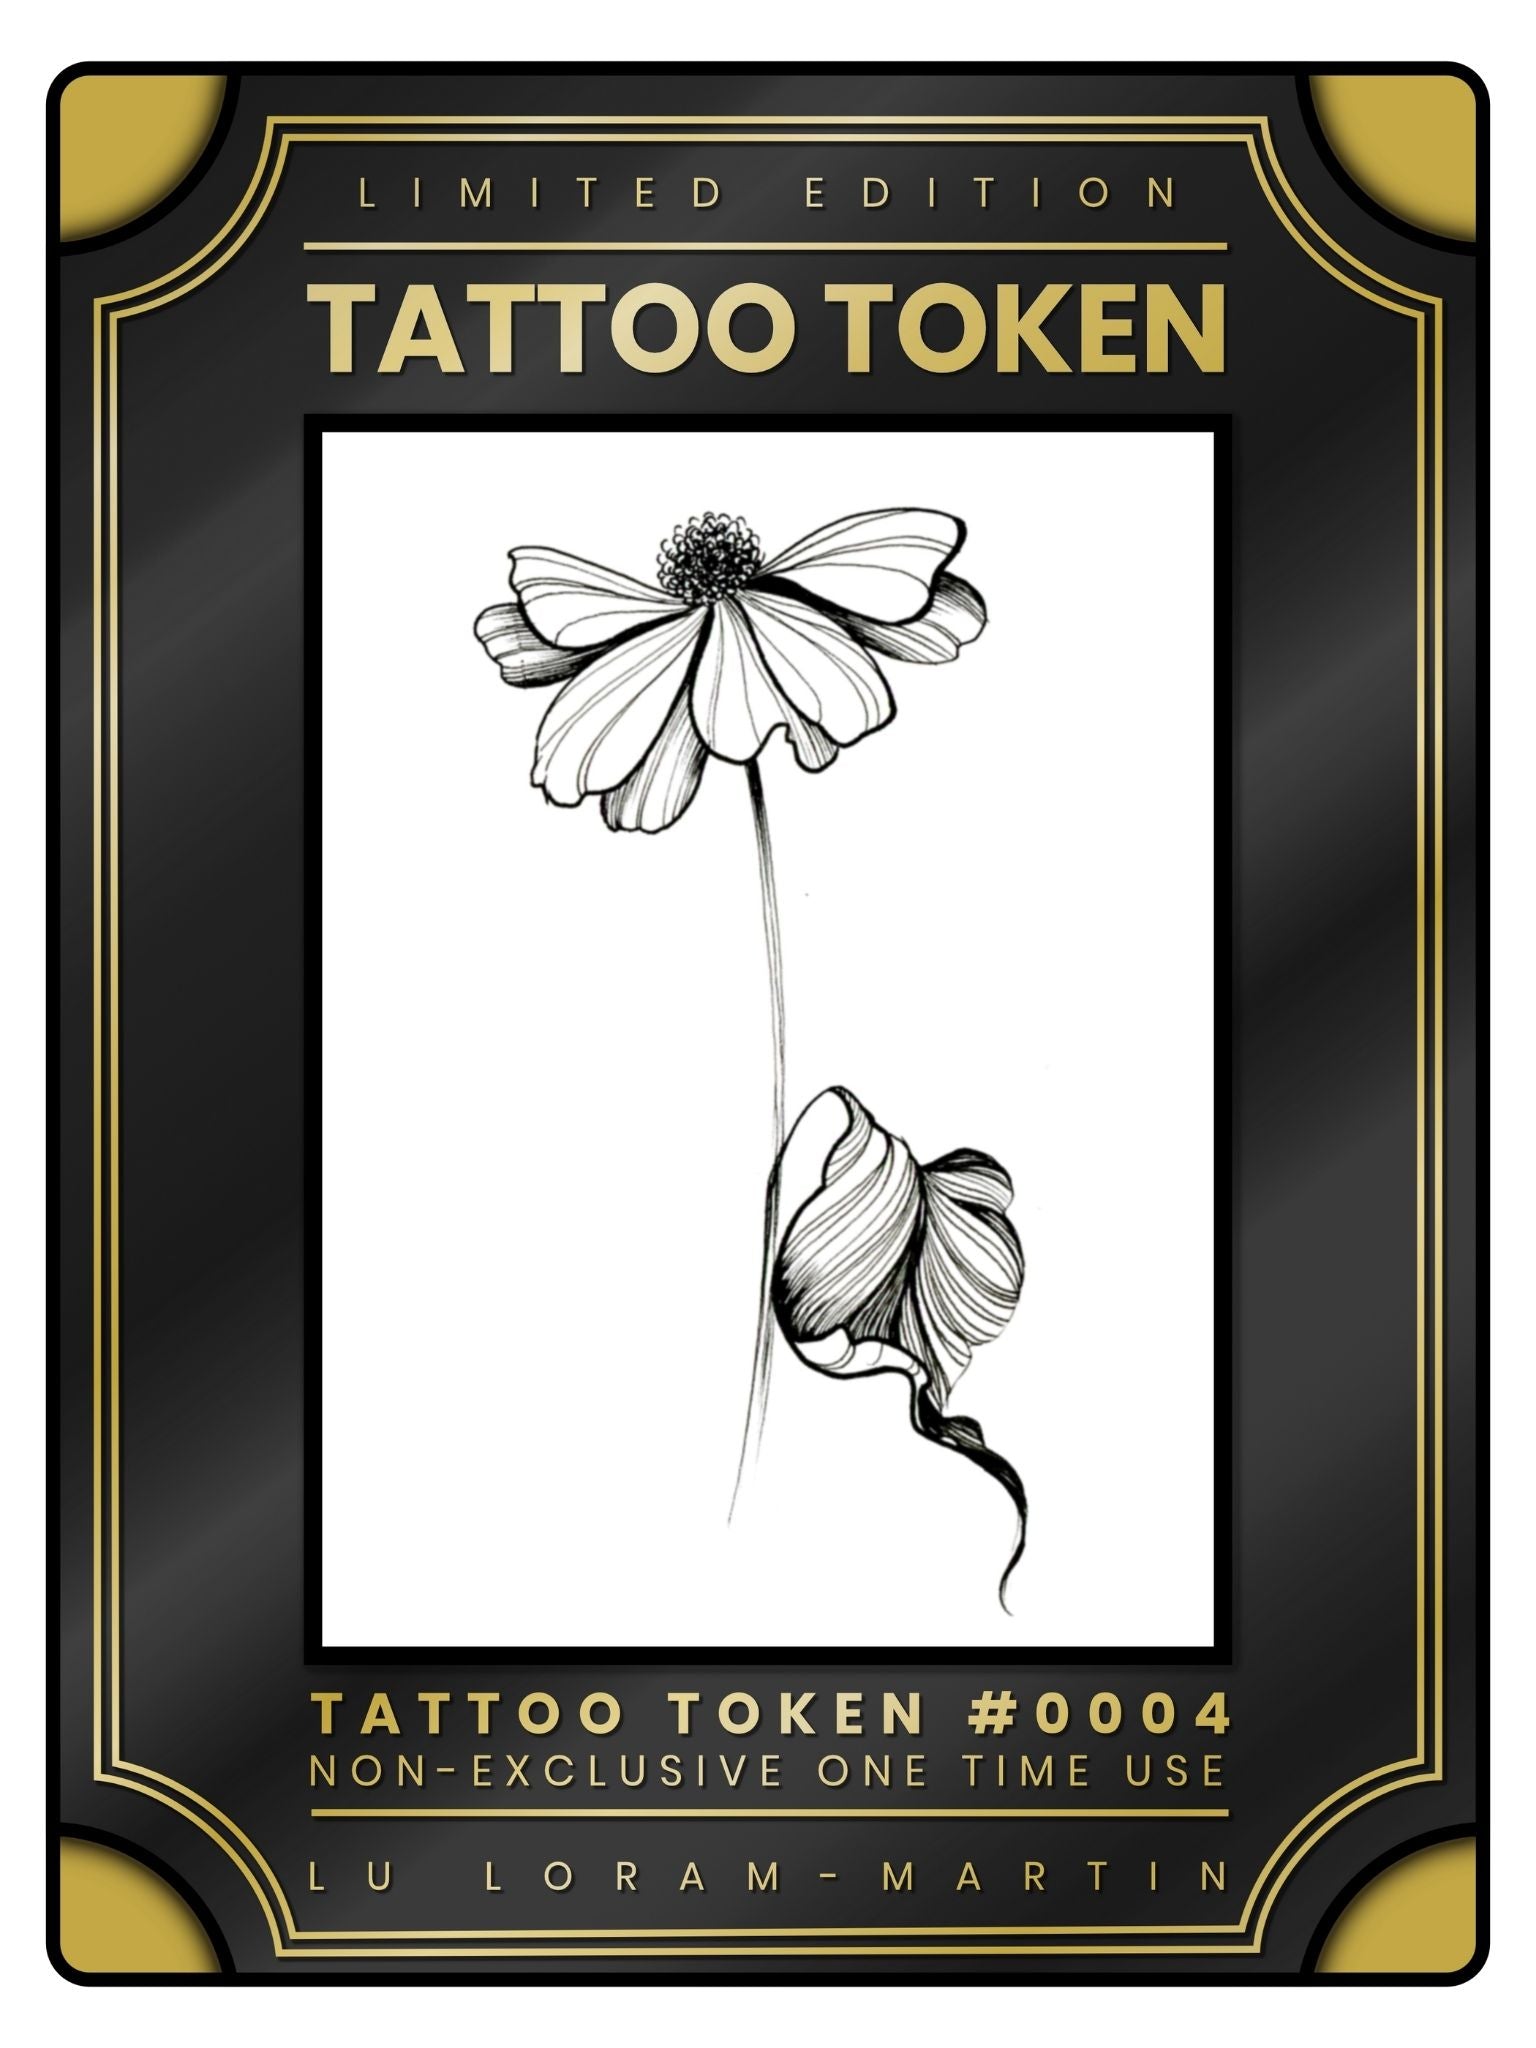 Wilted flower tattoo token design in black line work and shading, illustrated by female floral tattoo artist Lu Loram Martin, Toronto, Canada